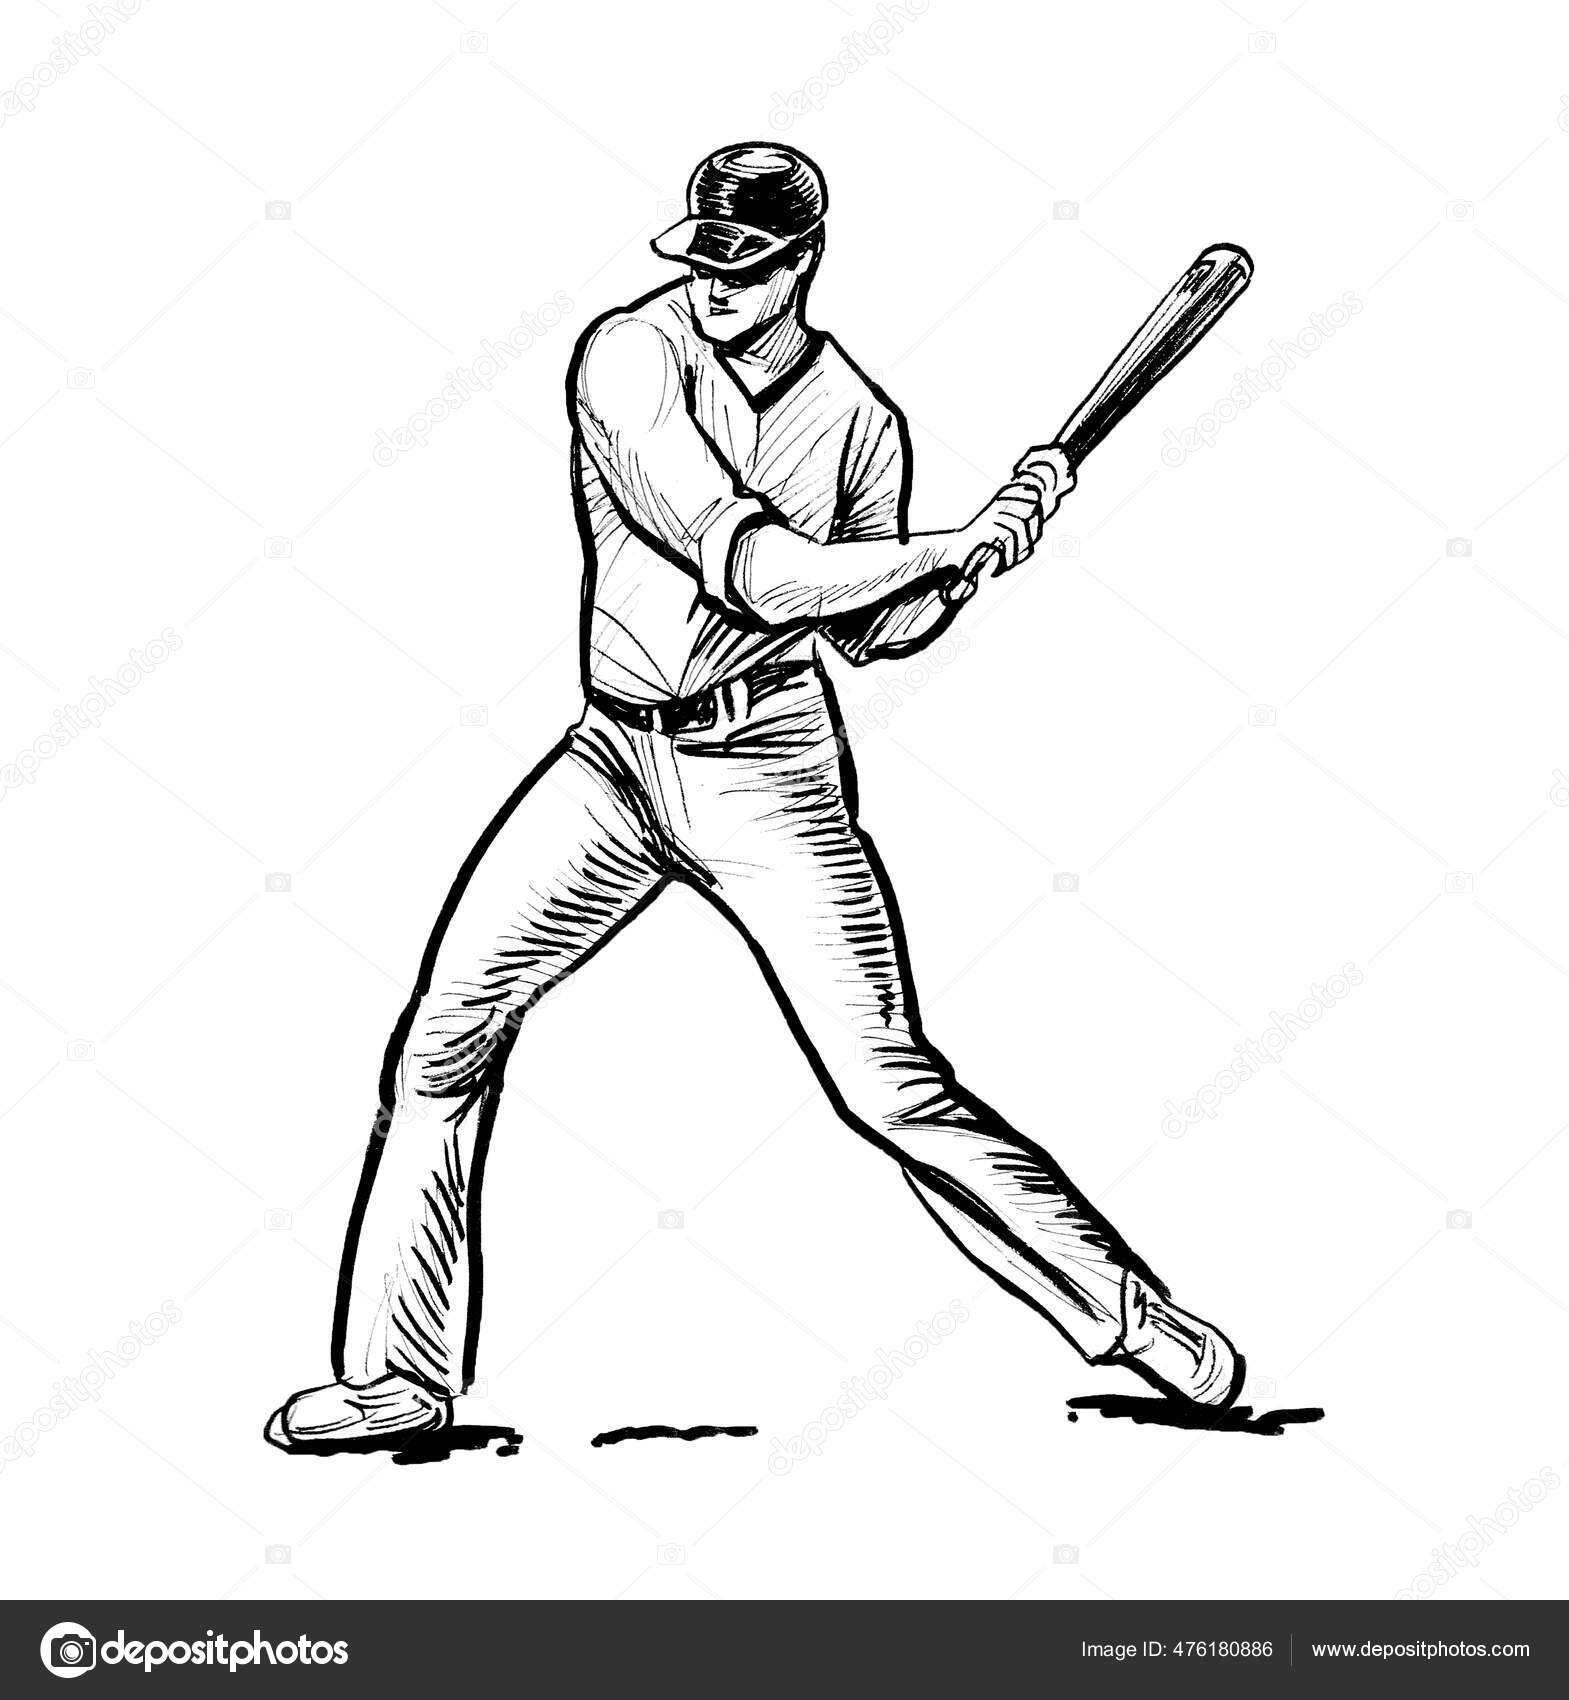 How to Draw a Baseball Player